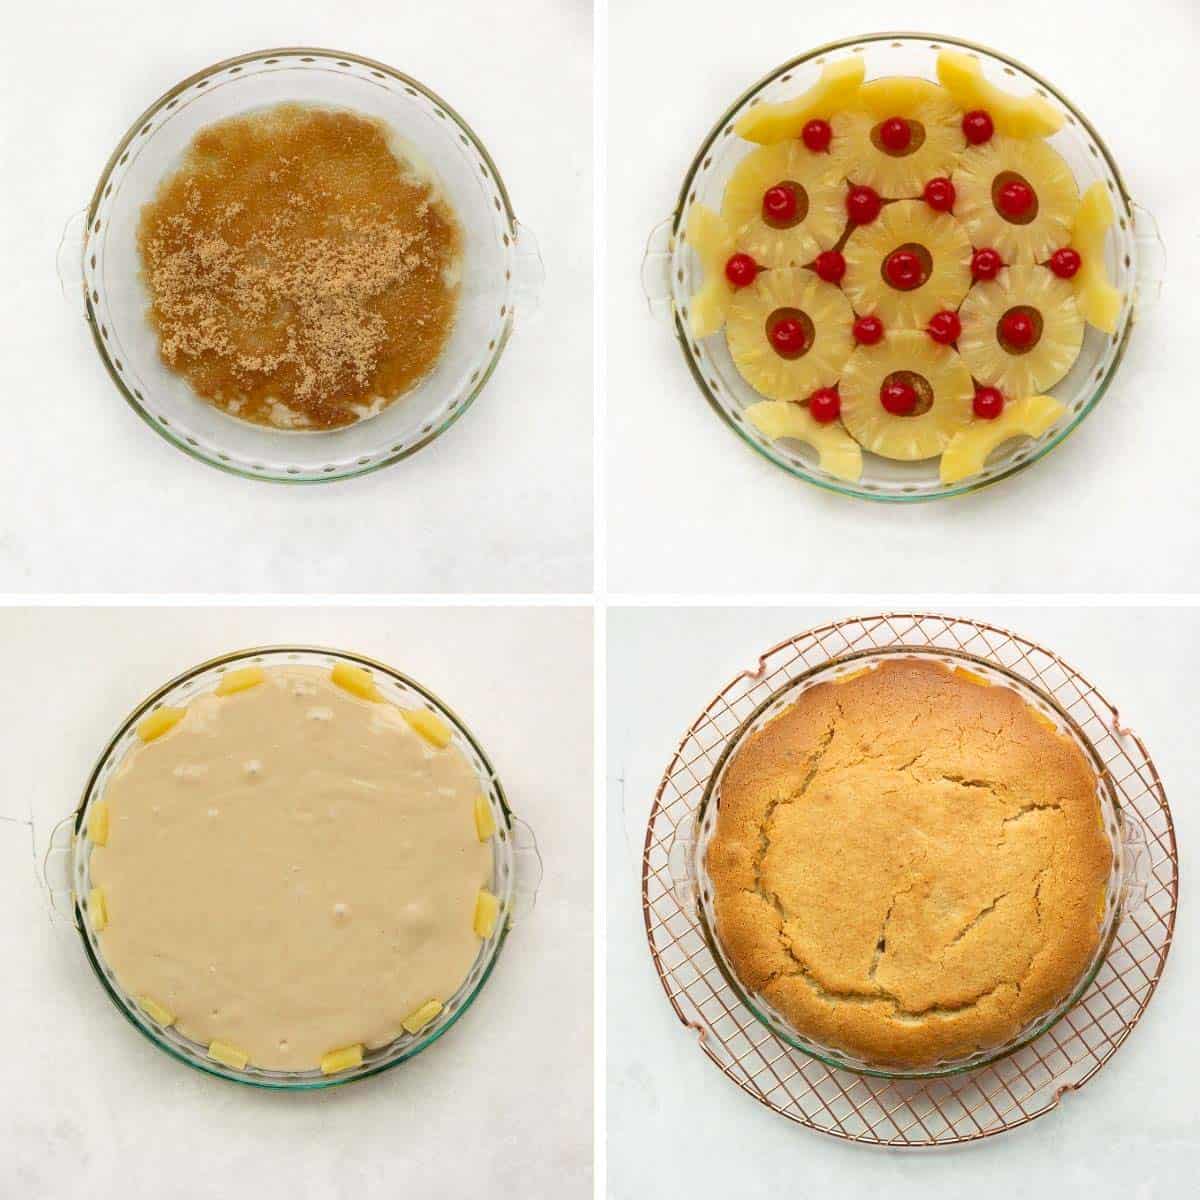 Four photos showing each stage of the upside-down cake, including the first layer of sugar, the batter, the cooked cake, and the flipped cake